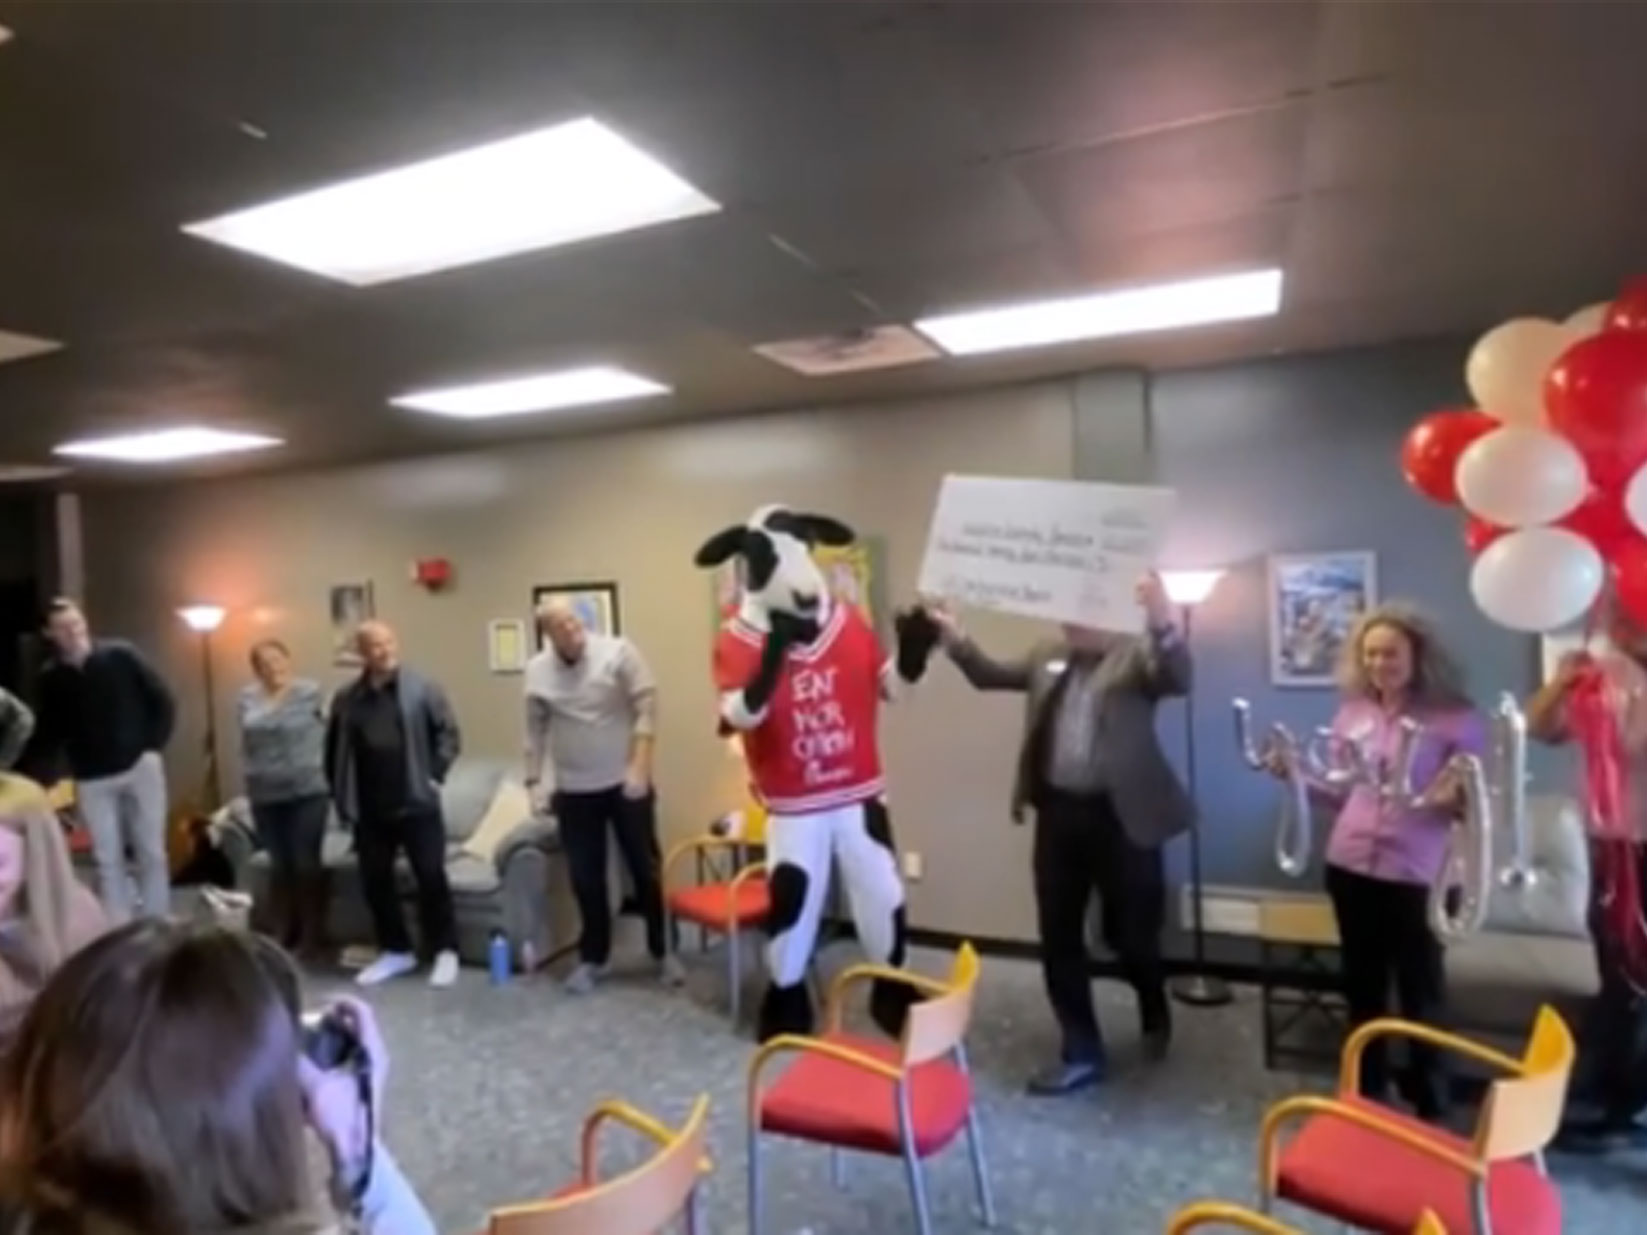 Play Video: Chick-fil-A gives $5 million in True Inspiration Awards grants to 34 organizations across the country making an impact in their local communities.